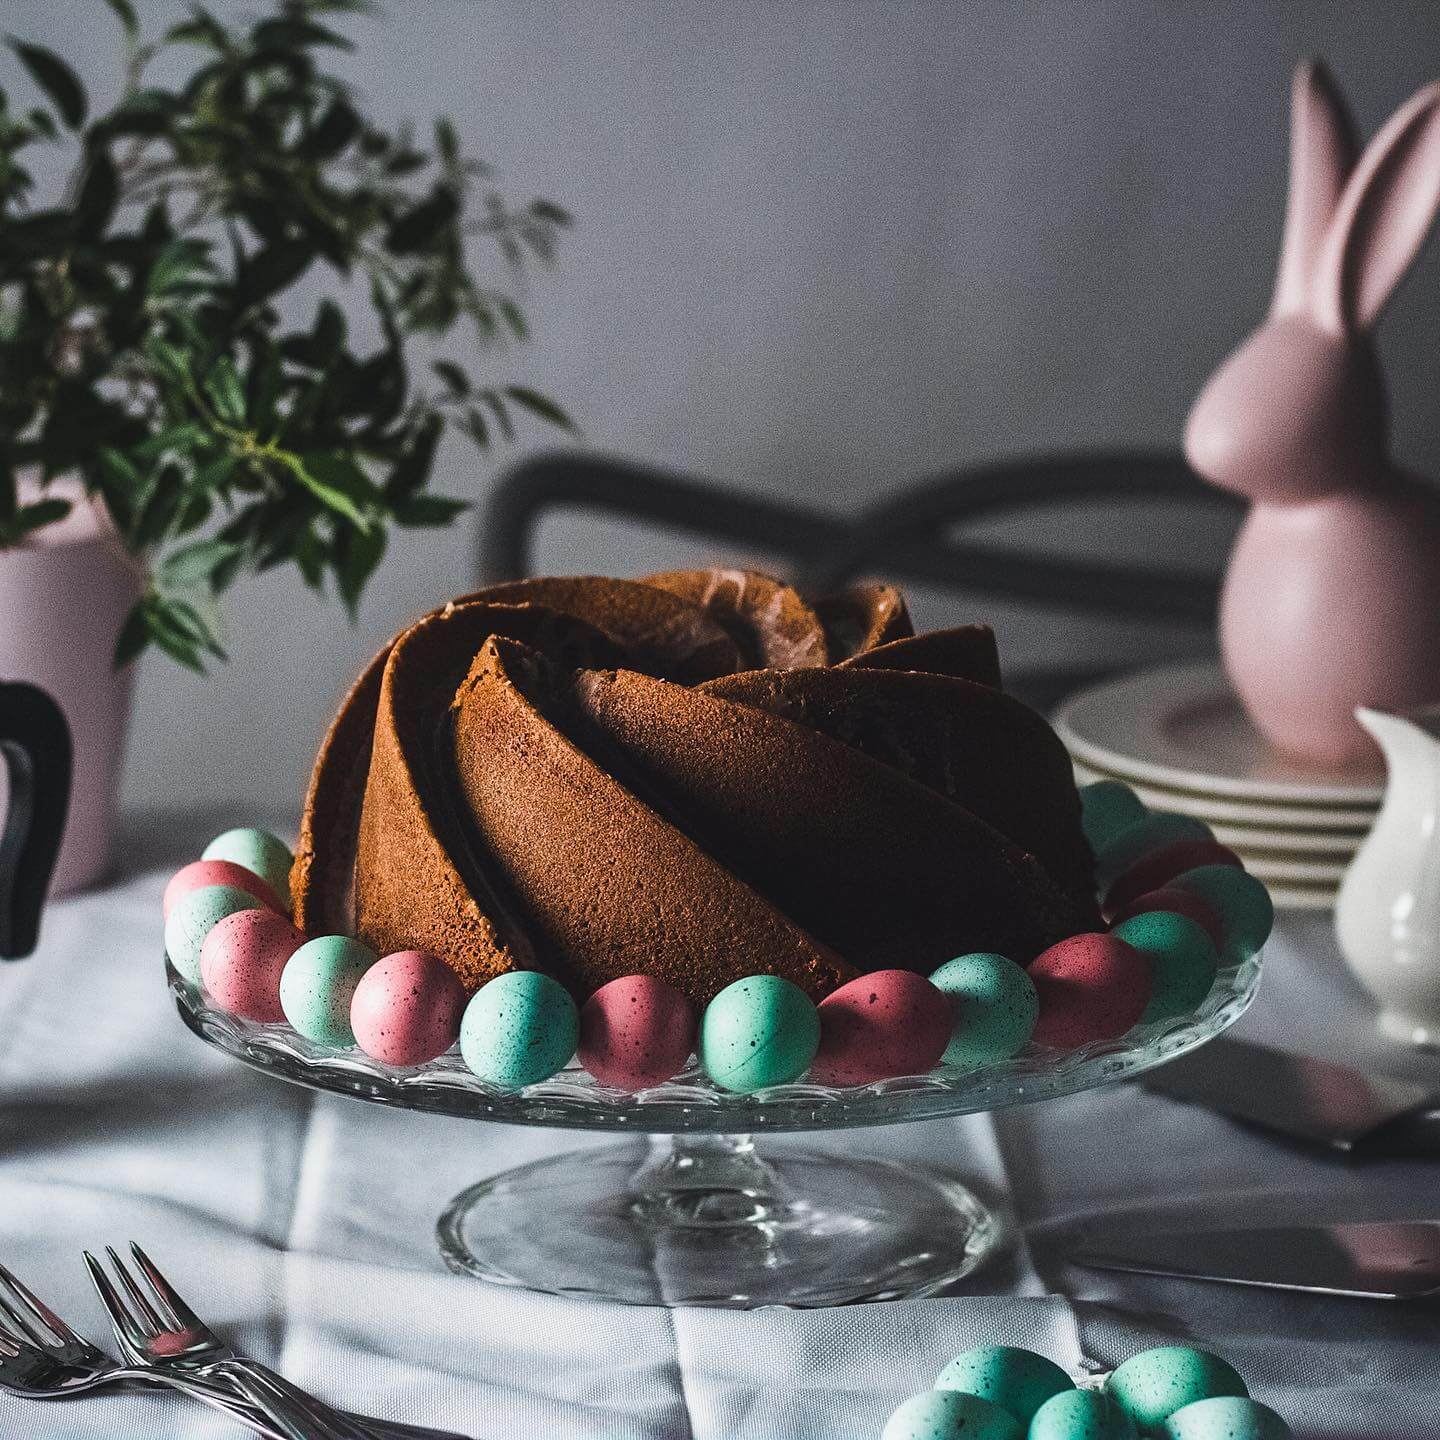 Happy Easter friends. 💐🌷🌸
.
Wish you all the best and a lot of health. Take care, Jan 👍🏻🙋🏻‍♂️
.
.
.
.
.
.
——————————-
#fotografiakulinarna #foodphotography #foodphotograhy #foodphotography📷 #foodphotography101 #foodphotographystyling #foodphotoblog #foodphotographyforbusiness #darkmoodyphotography #darkmoody #moodyfood #moodyfoodphotography #easterbunny #easter2020🐰 
#eastersunday #easterdessert #easterfood